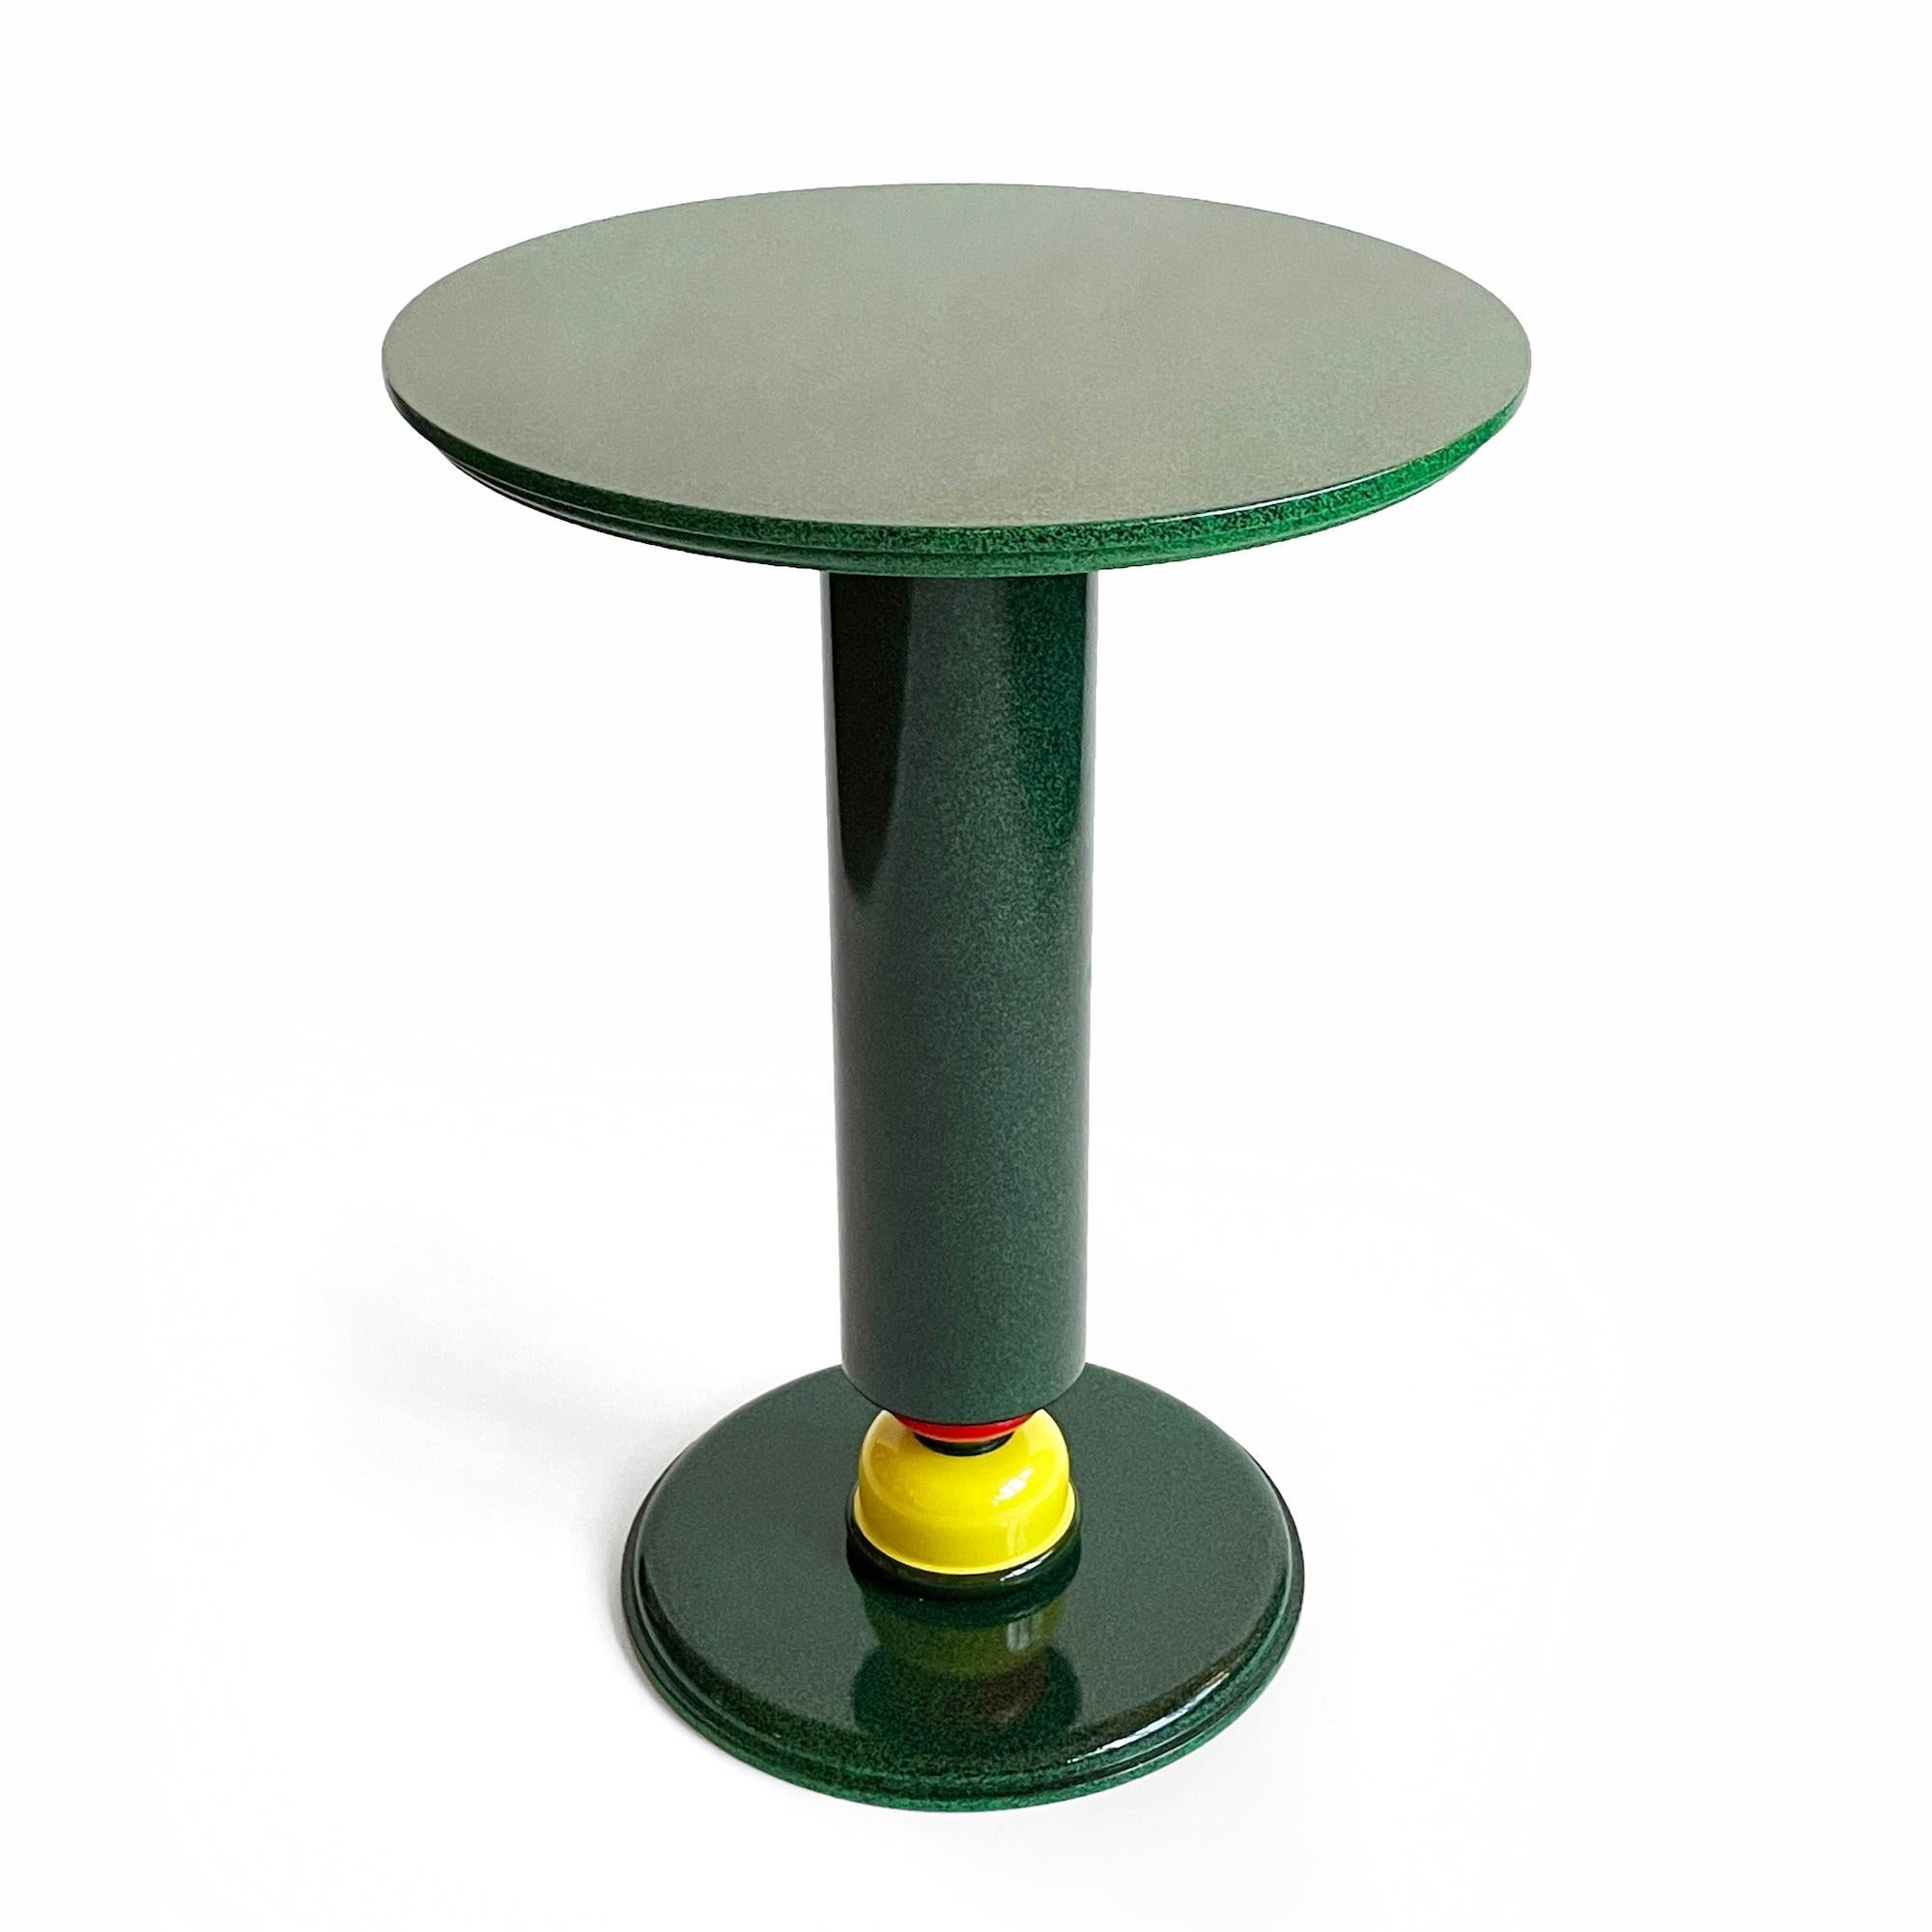 An exceptional 1980s French postmodern drinks or side table designed by Olivier Villatte.  Drawing on a strong Memphis Milano inspiration, Villatte created a high gloss lacquered wood table with a speckled green and black primary color scheme and